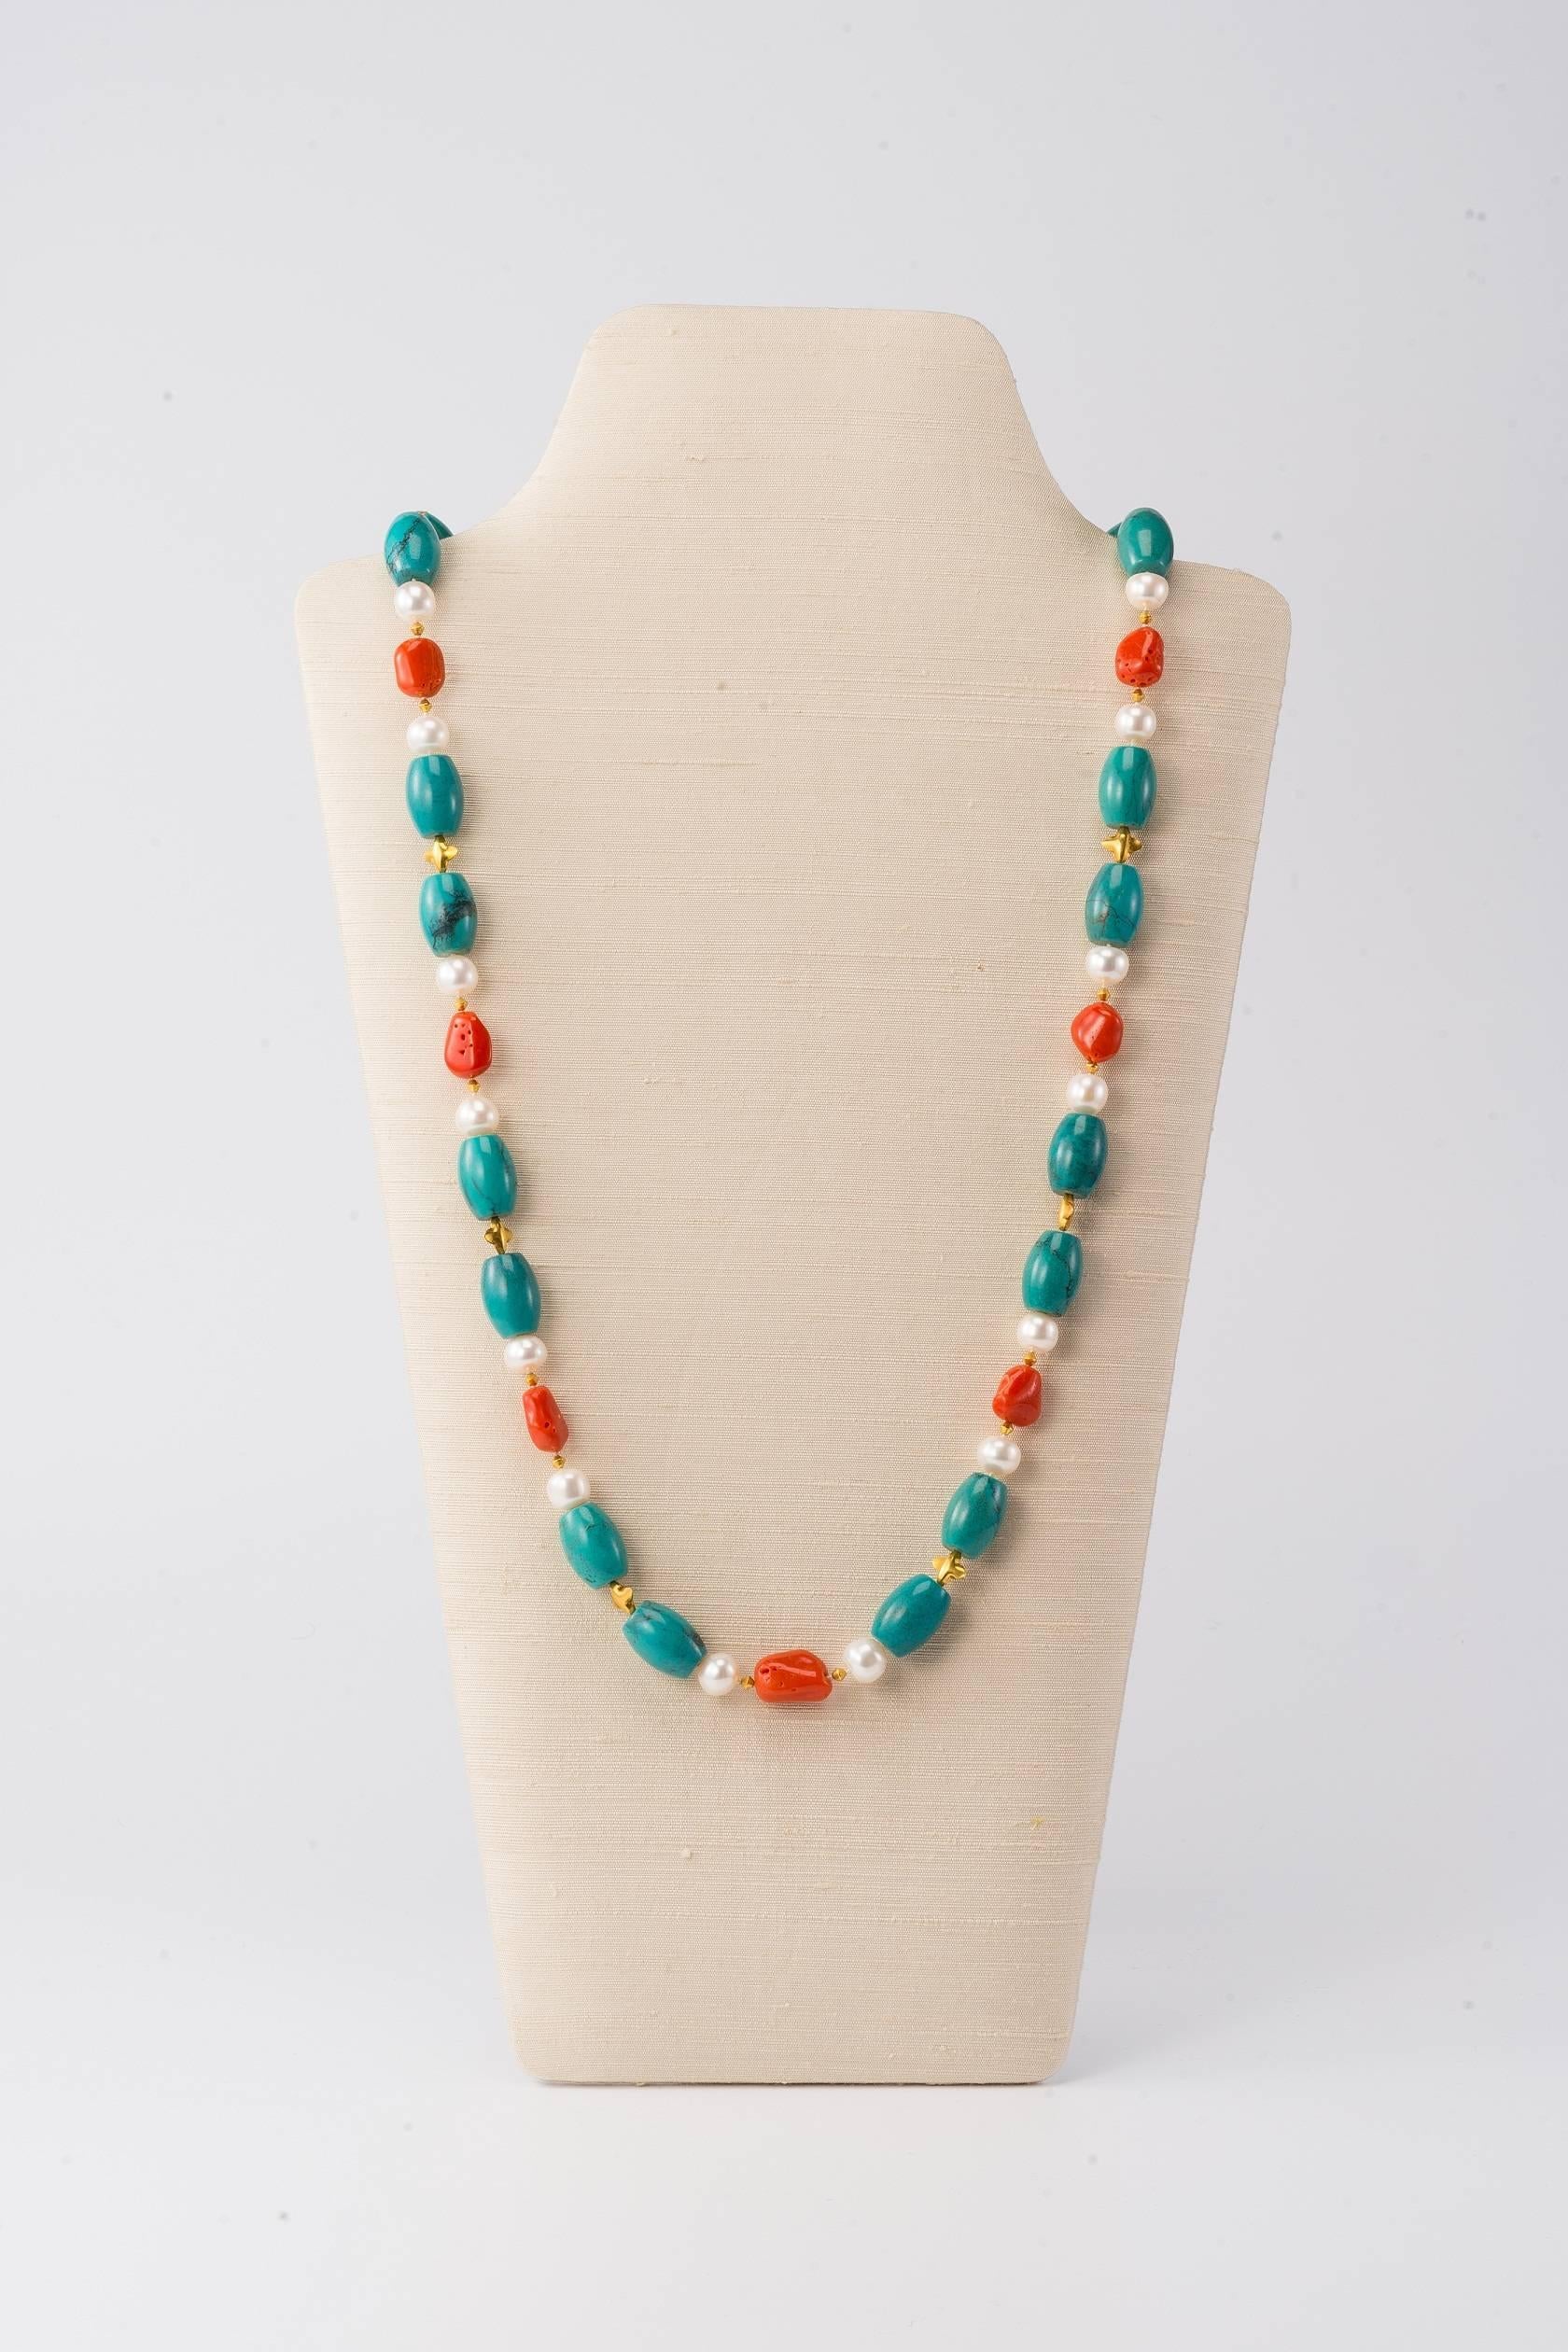 34 in (86.5cm) long necklace with Tibetan turquoise, Sardinian coral pebbles, freshwater pearls and 18K gold beads & clasp

This classic mix of turquoise, coral & pearls with gold bead accents can be worn long or twisted double around the neck. 